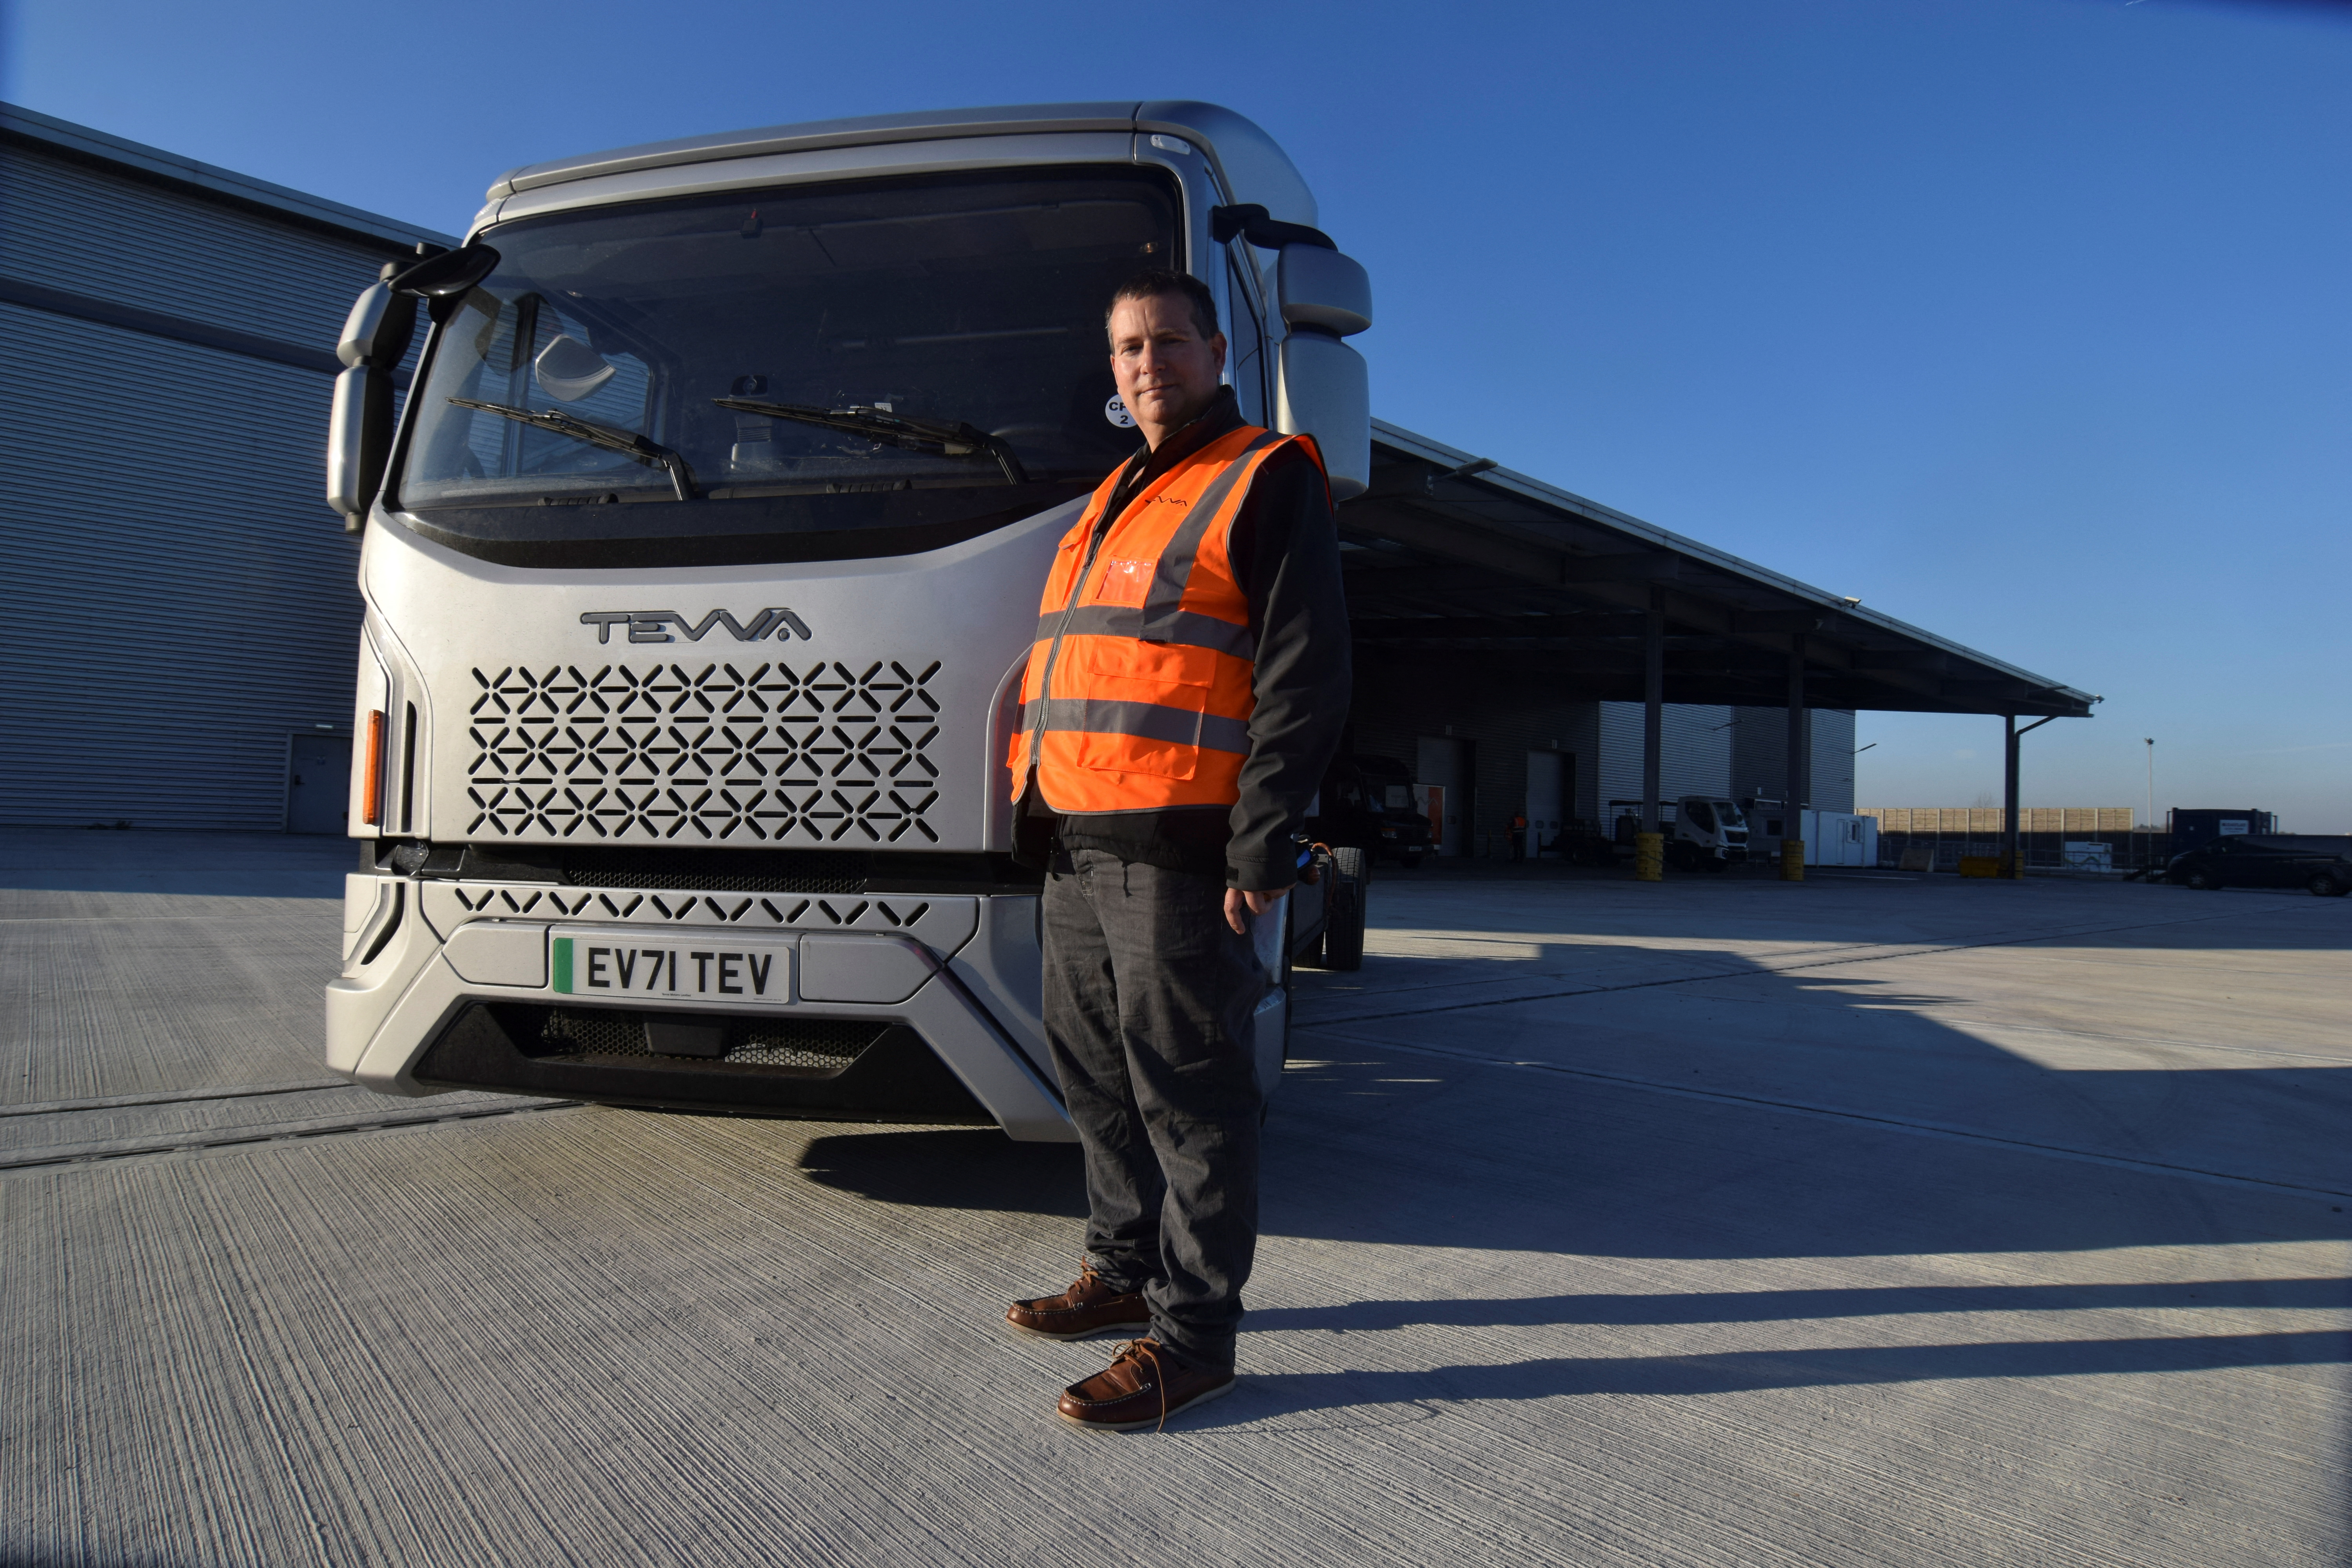 Asher Bennett, CEO of electric truck maker Tevva, poses for a photo in front of a pre-production prototype truck at the startup's UK plant, in Tilbury